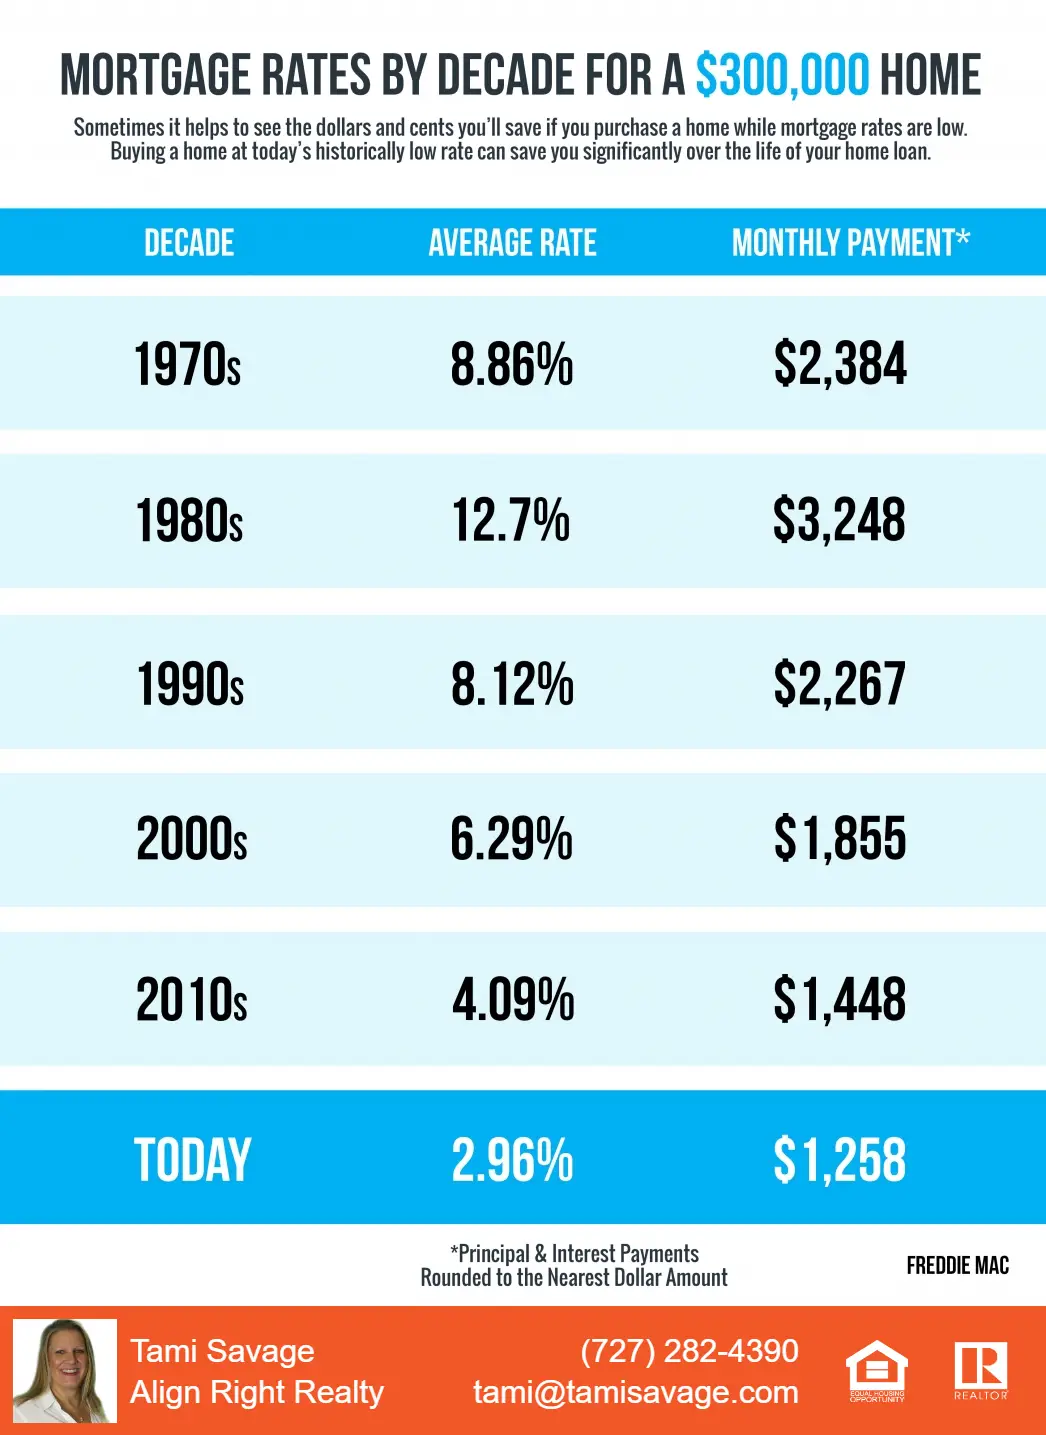 Mortgage Rates &  Payments by Decade [INFOGRAPHIC]